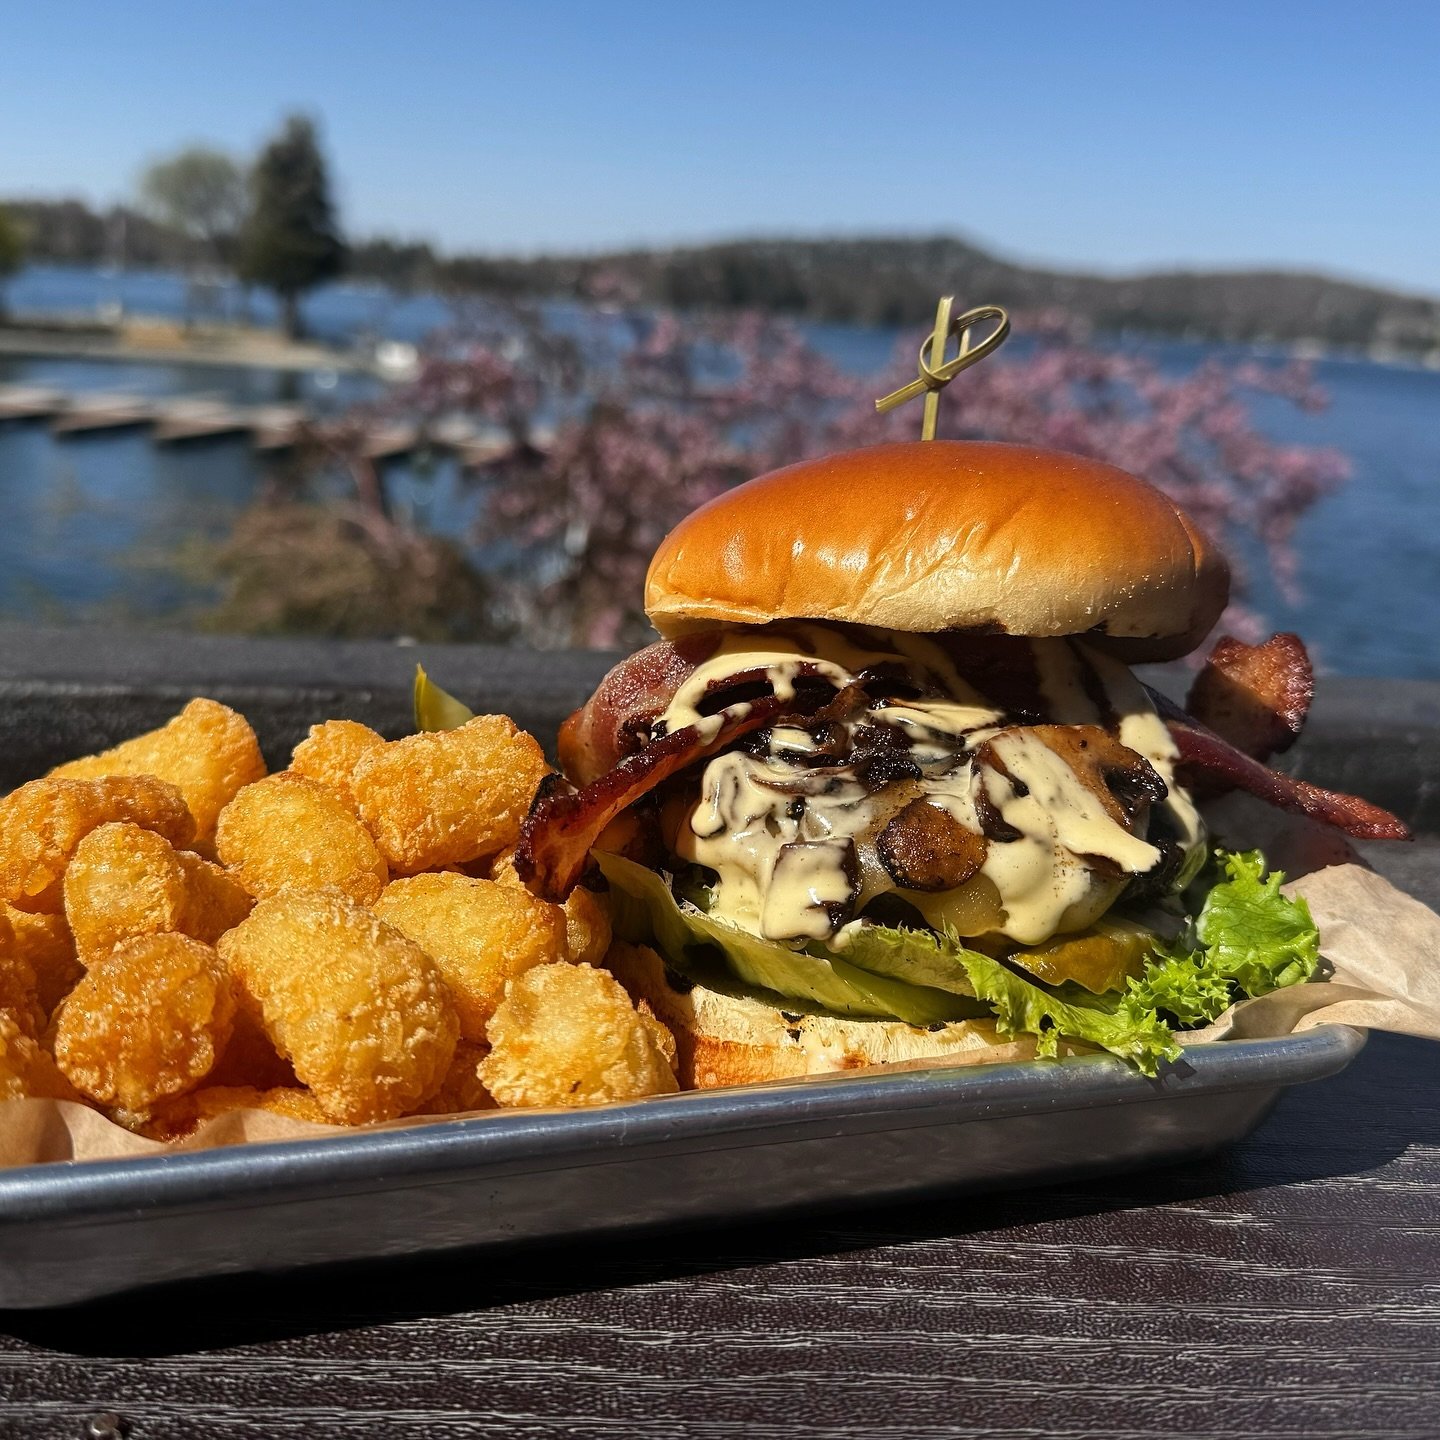 🍔 Did you know that we have a new #burgerofthemonth? For May, we&rsquo;re featuring the Smoked Gouda &amp; Mushroom Burger! 

🍄&zwj;🟫 Enjoy a tasty wagyu beef patty, crispy bacon, sauteed mushrooms, grilled onions, smoked gouda, house mustard, let